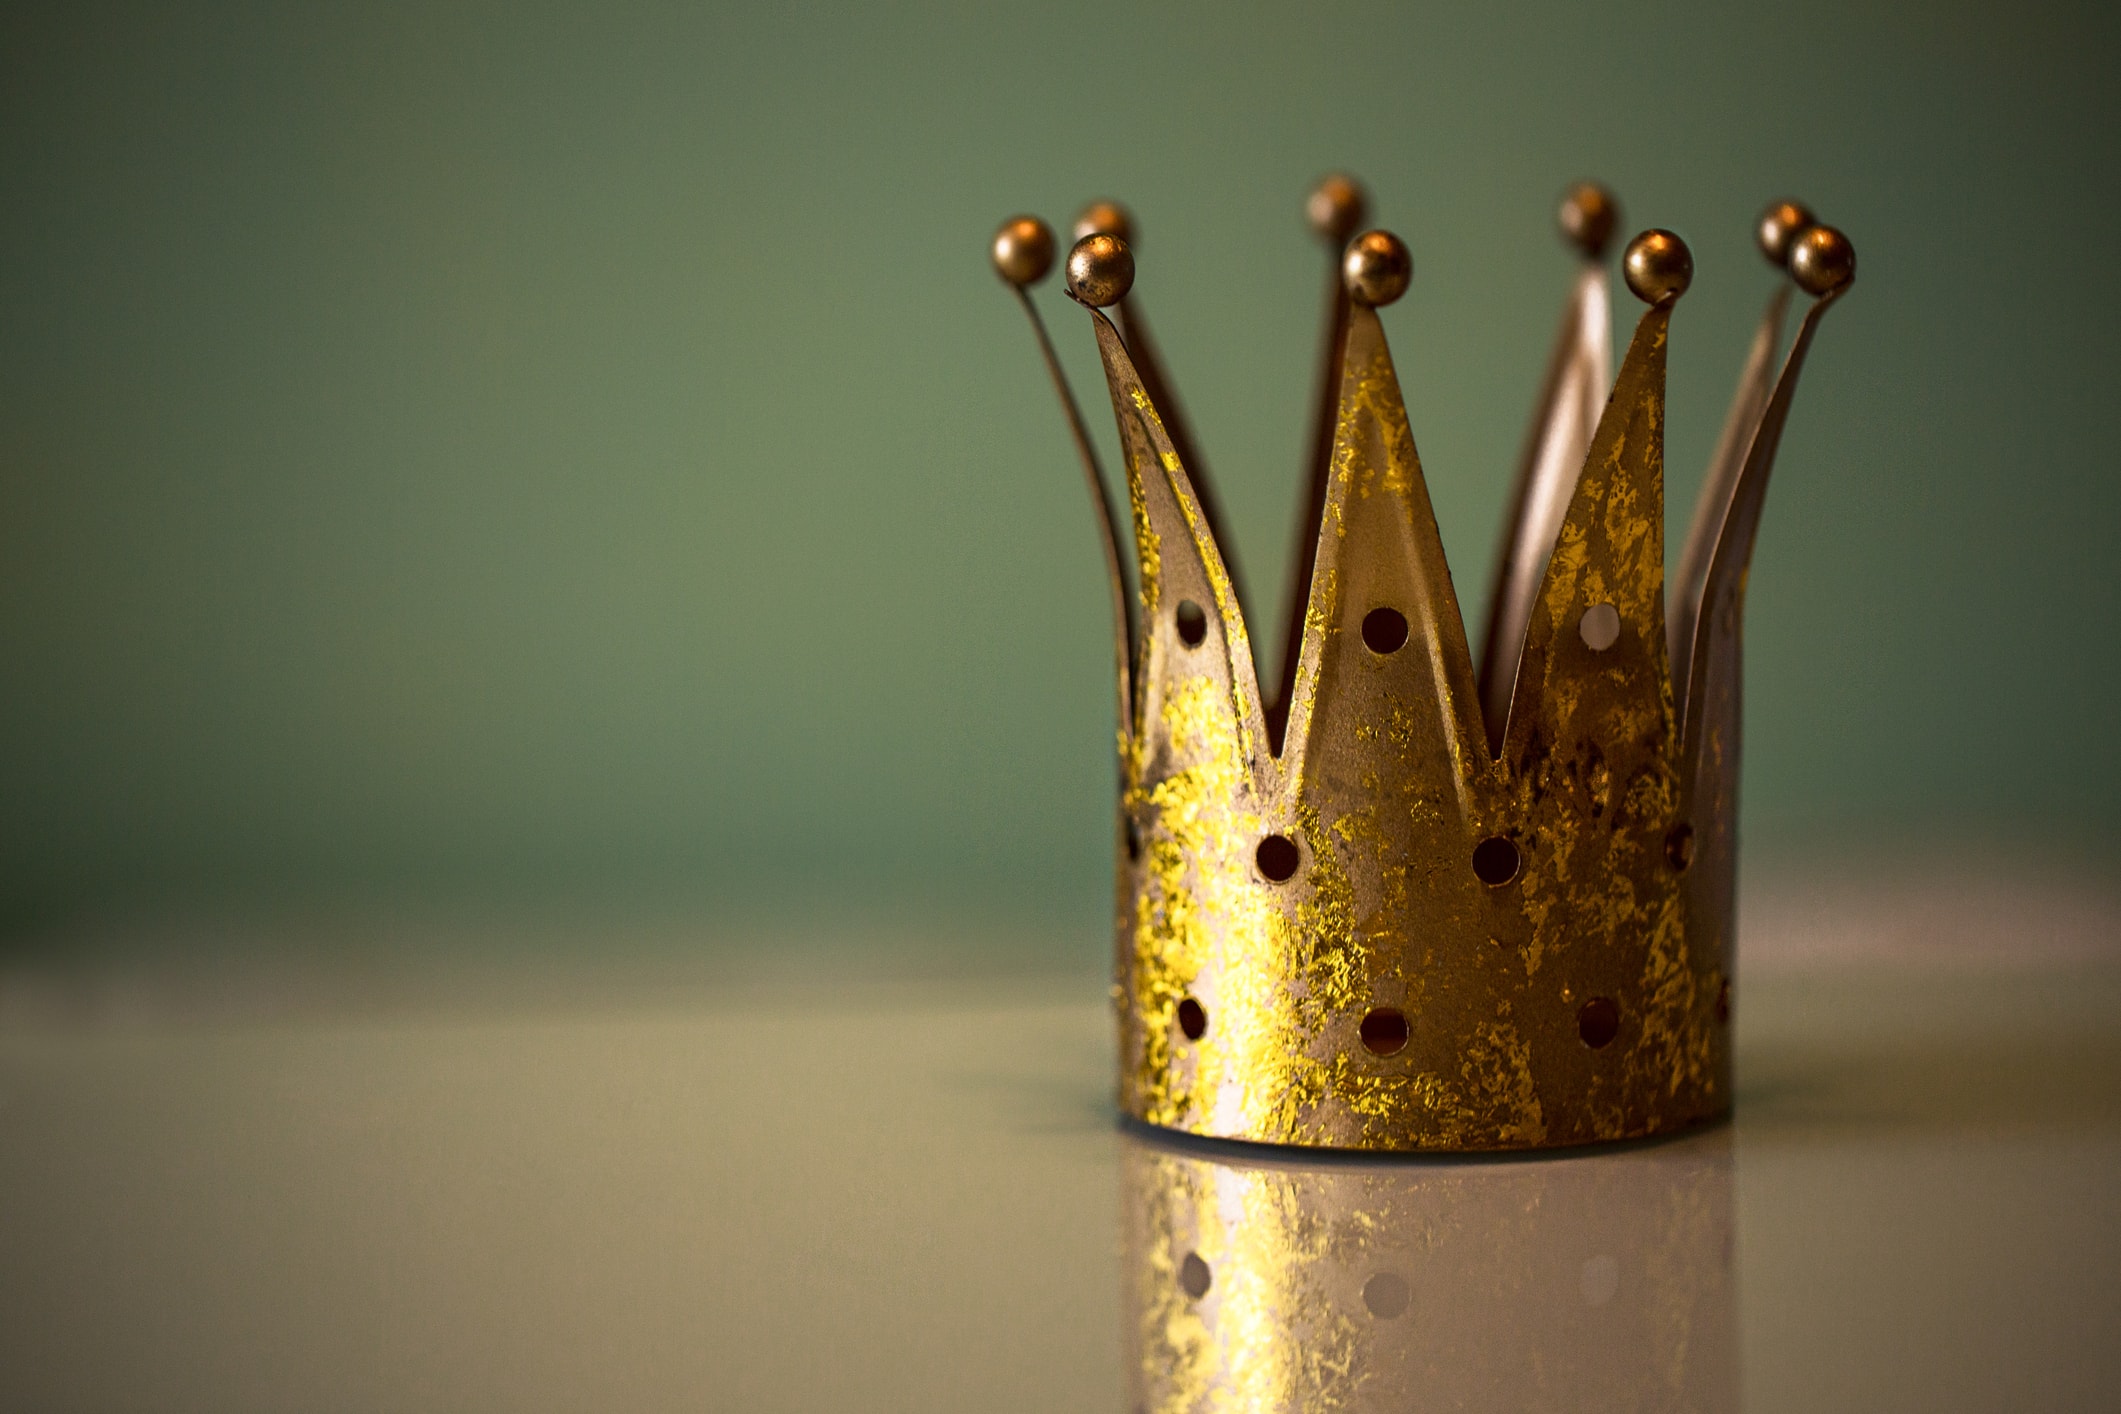 How To Maximize Revenue From Your Over-The-Top Content - content is king